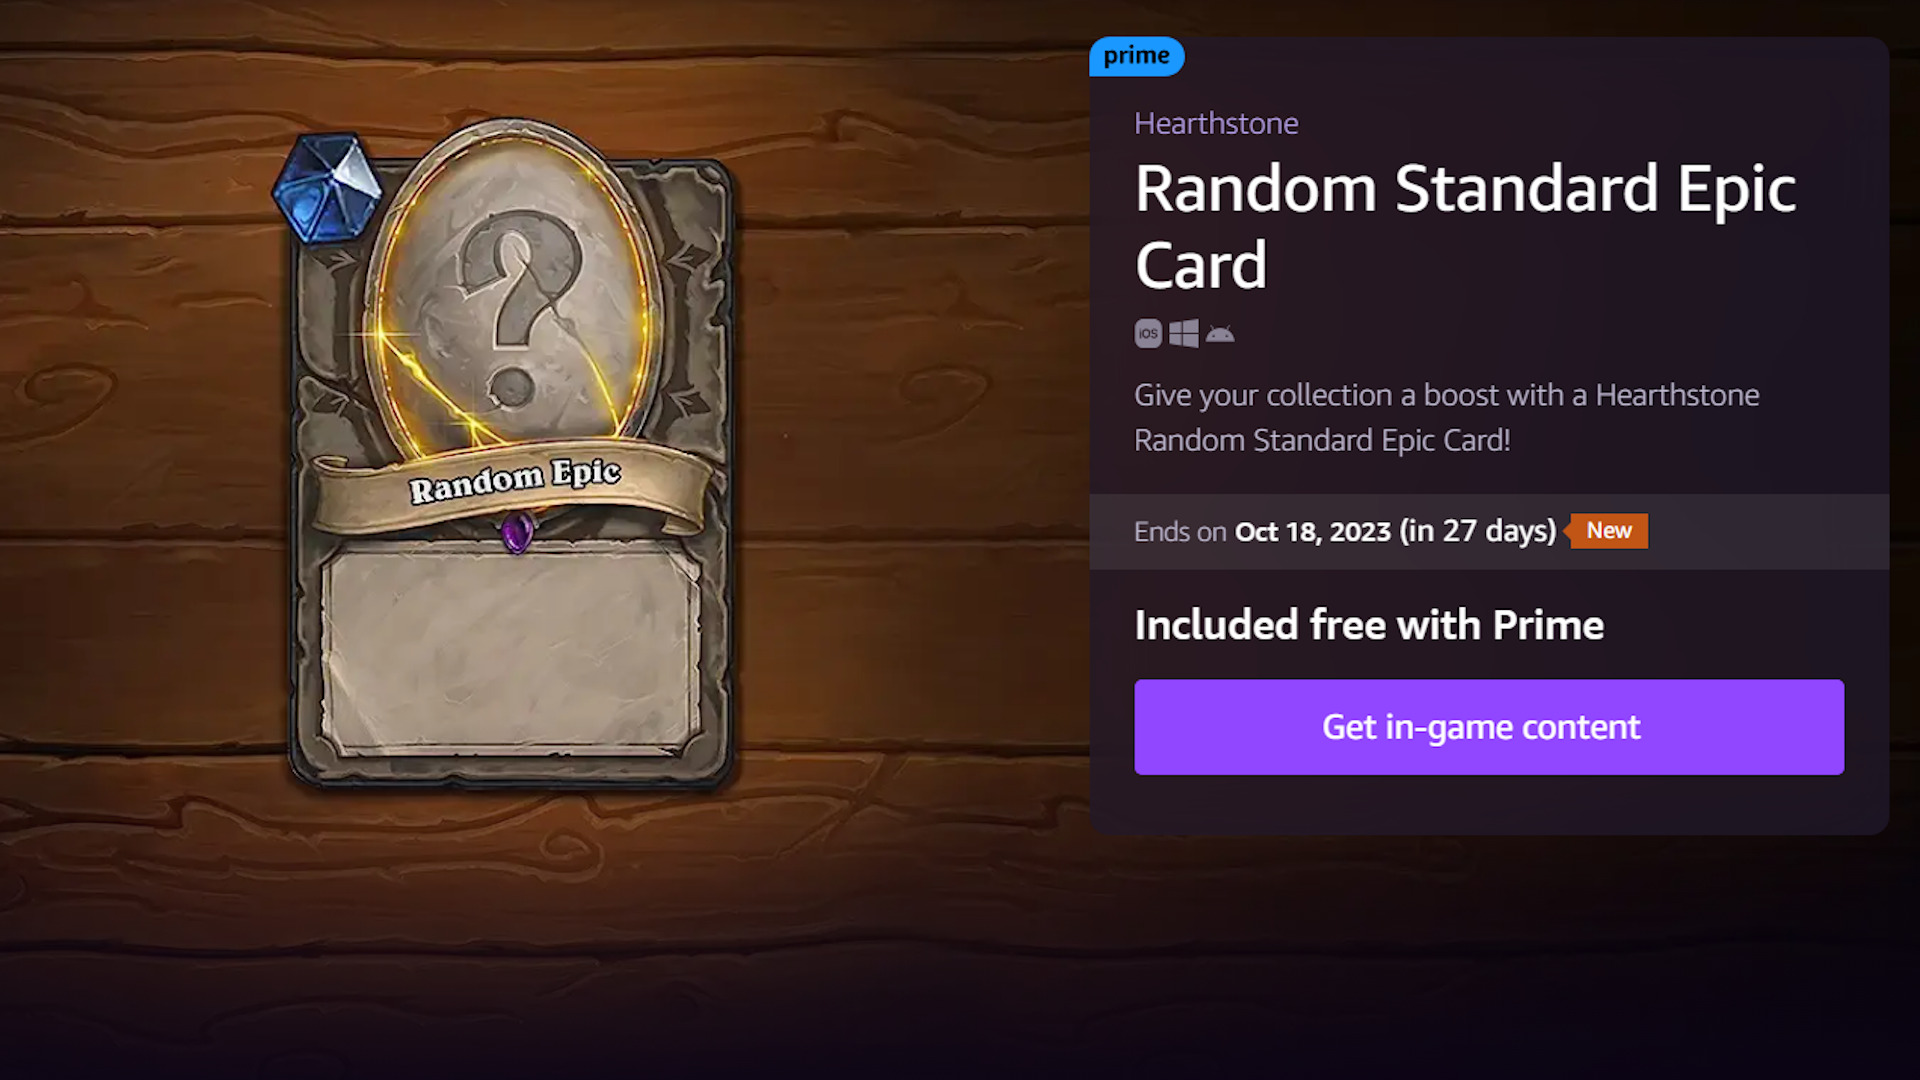 Showdown in the Badlands Theorycraft streams begin now! Tune in to your  favorite Hearthstone creators to earn free packs with Twitch Drops…